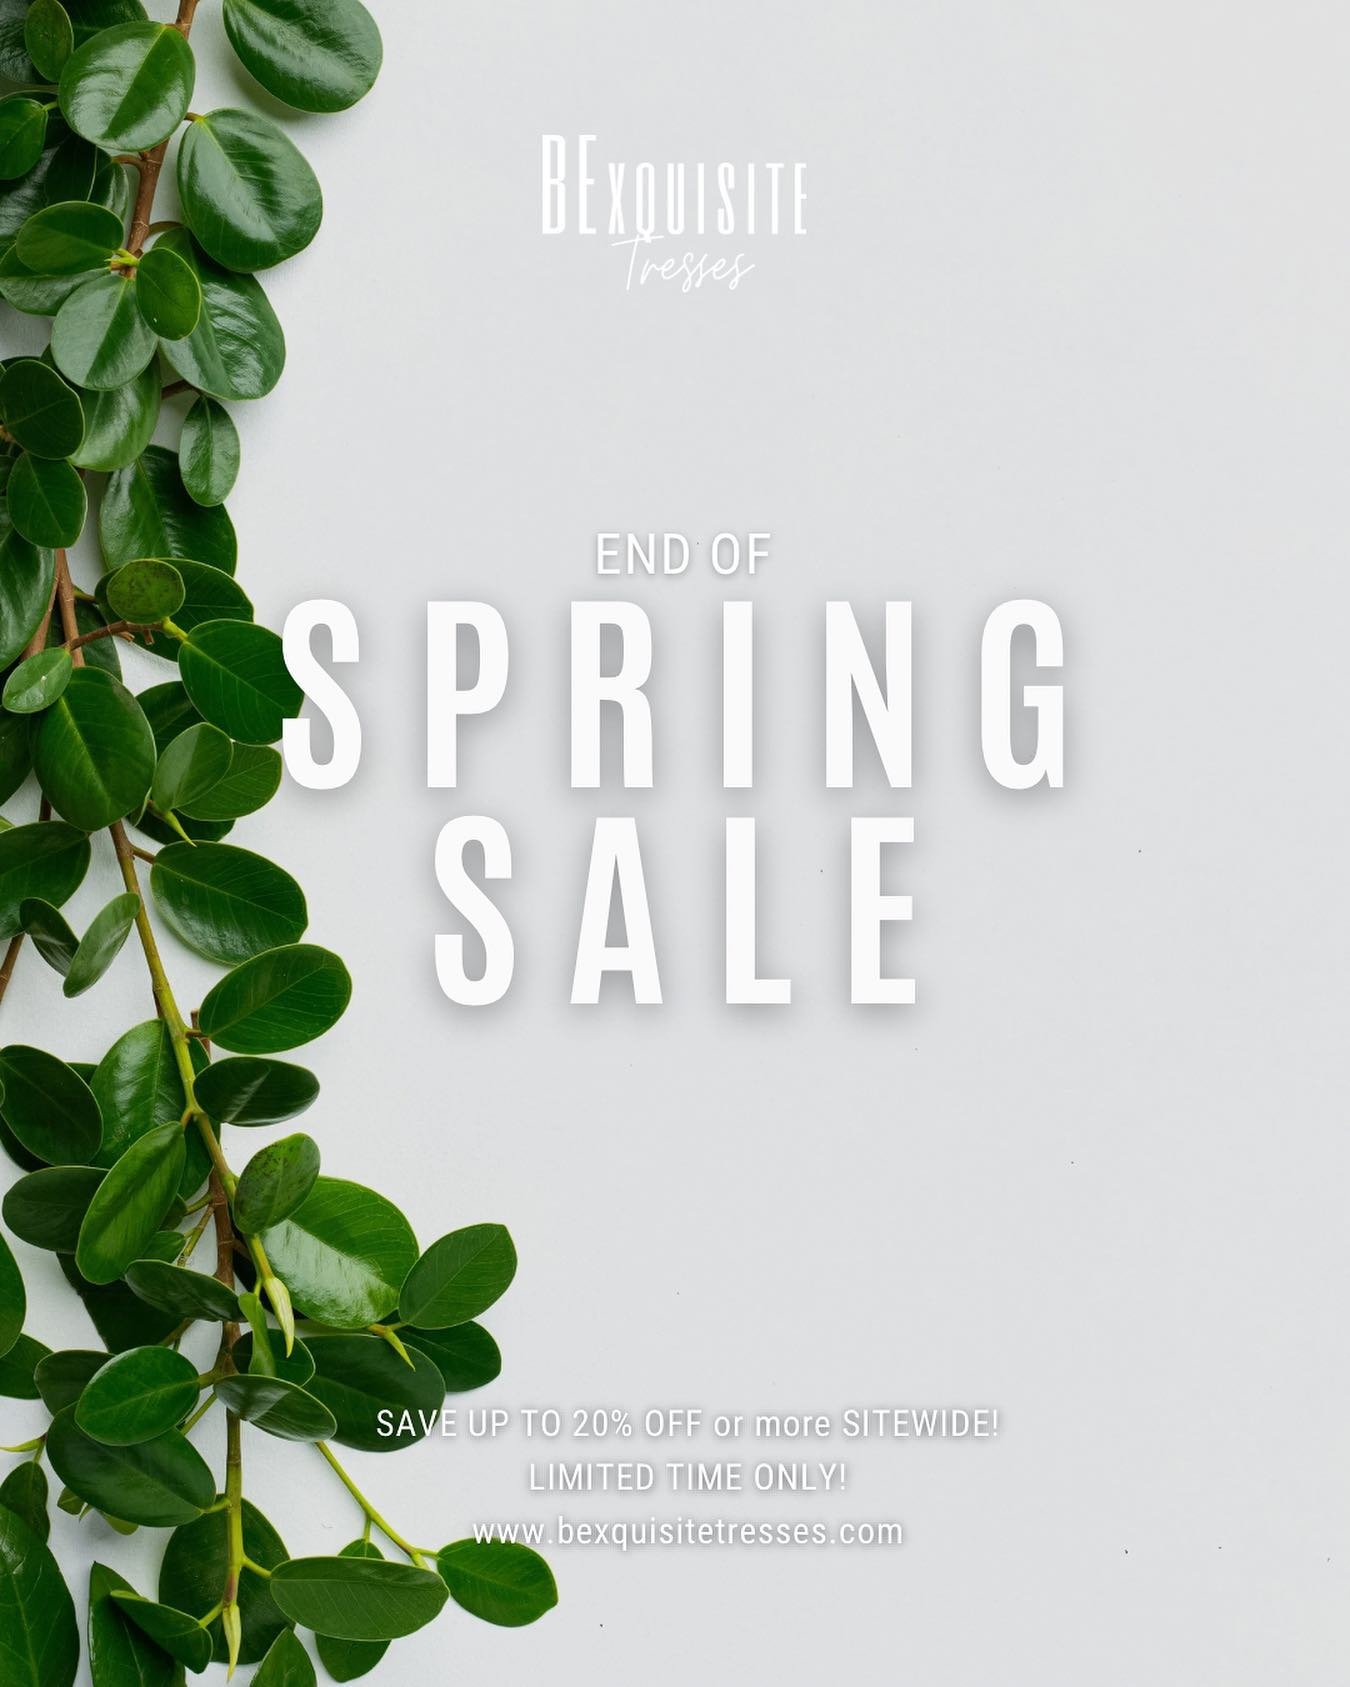 | Have you checked your email yet? 💌 Our End of SPRING SALE is in full swing! 🌱✨
&bull;
It&rsquo;s always the perfect time to enhance your natural beauty with some new/fresh/different tresses! 🥰
&bull;
Enjoy up to 20% off or MORE SITE-WIDE on our 